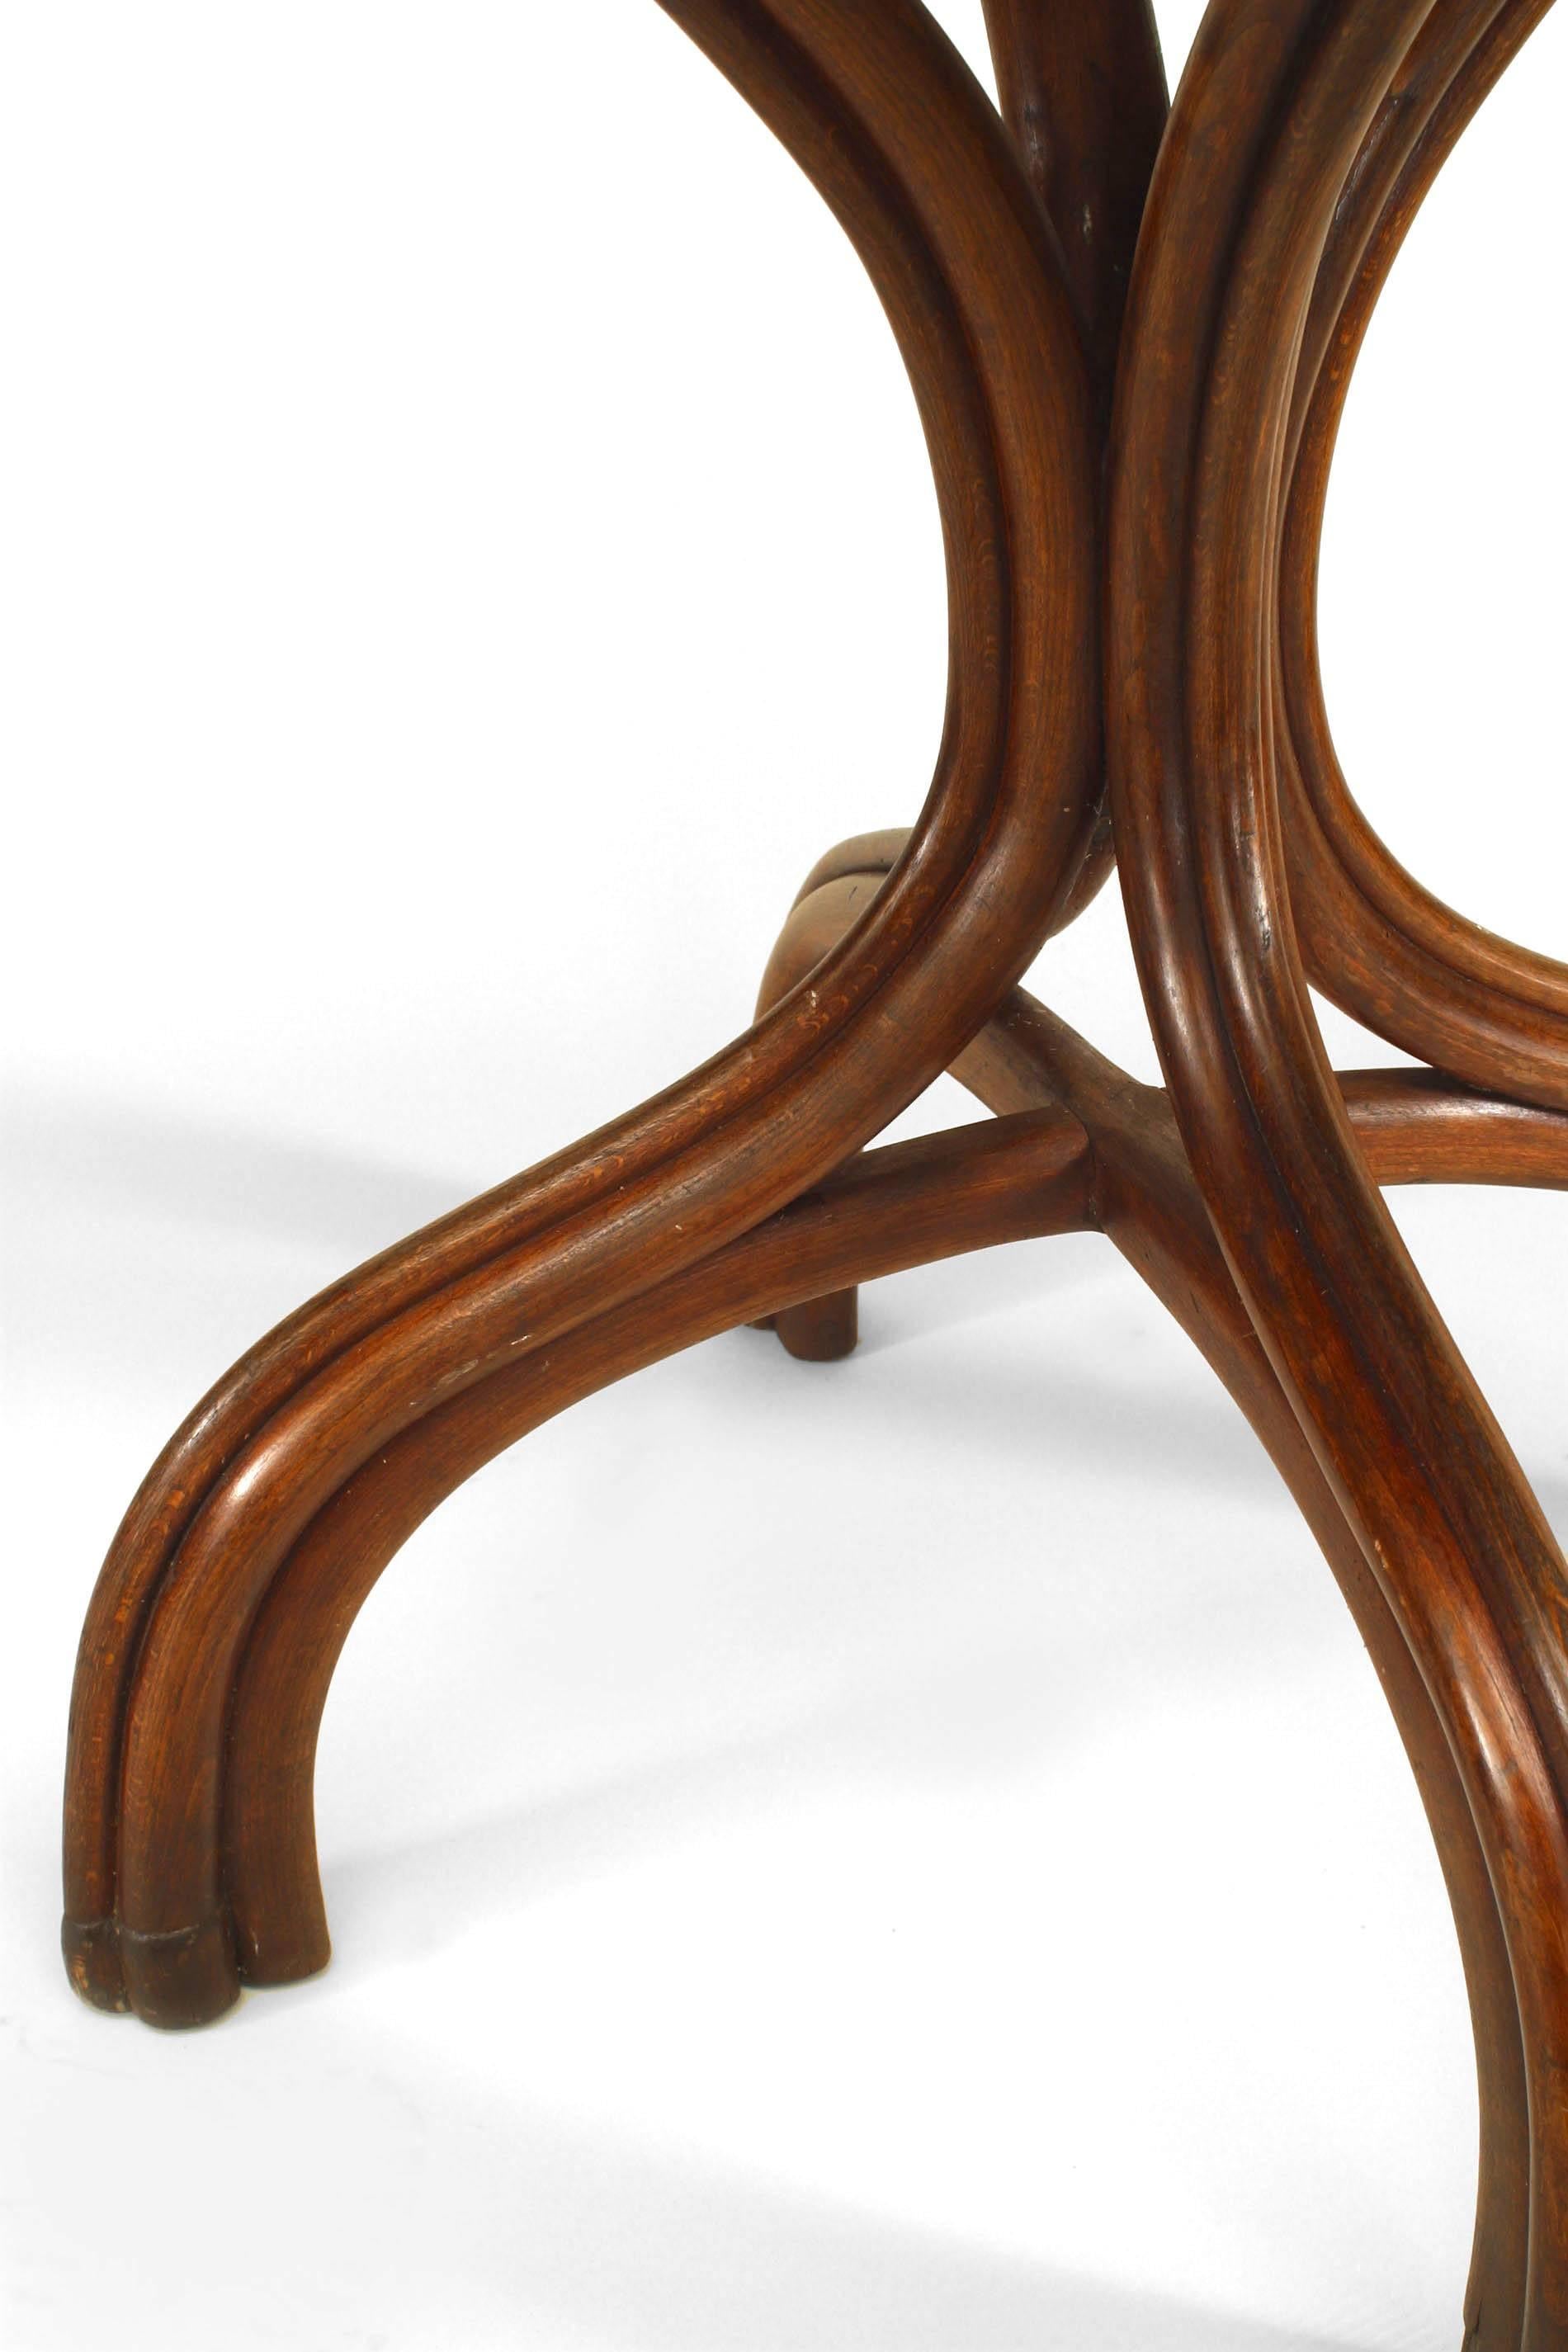 Bentwood (19/20th Century) stained walnut rectangular caf√© table with cluster design 4 leg pedestal base.
